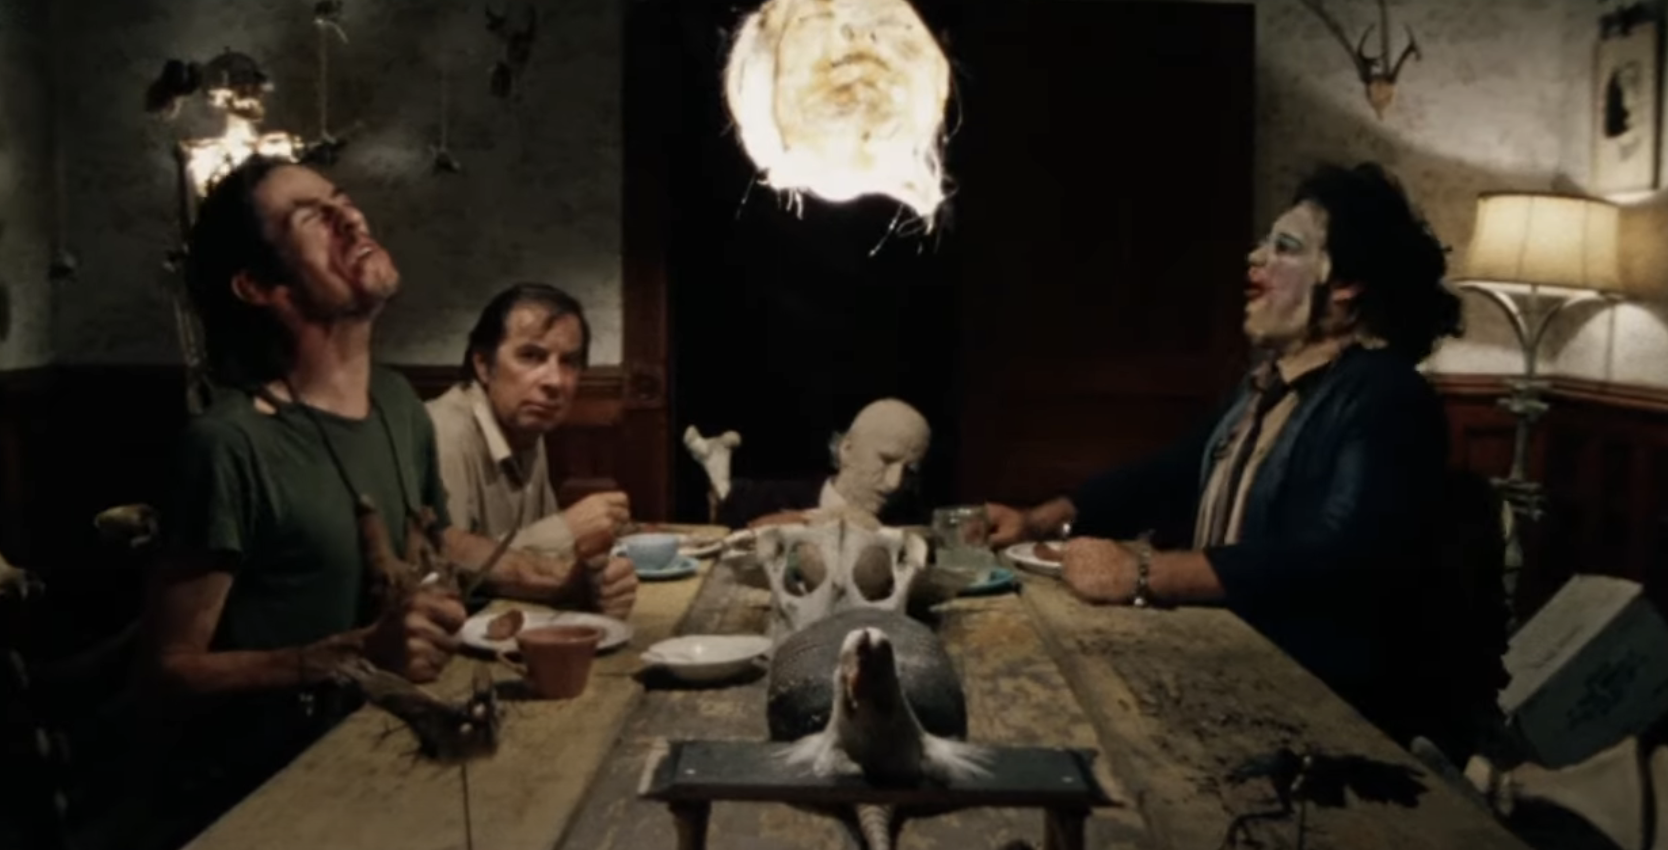 A scene from the movie around the family dinner table, with a skull in the middle